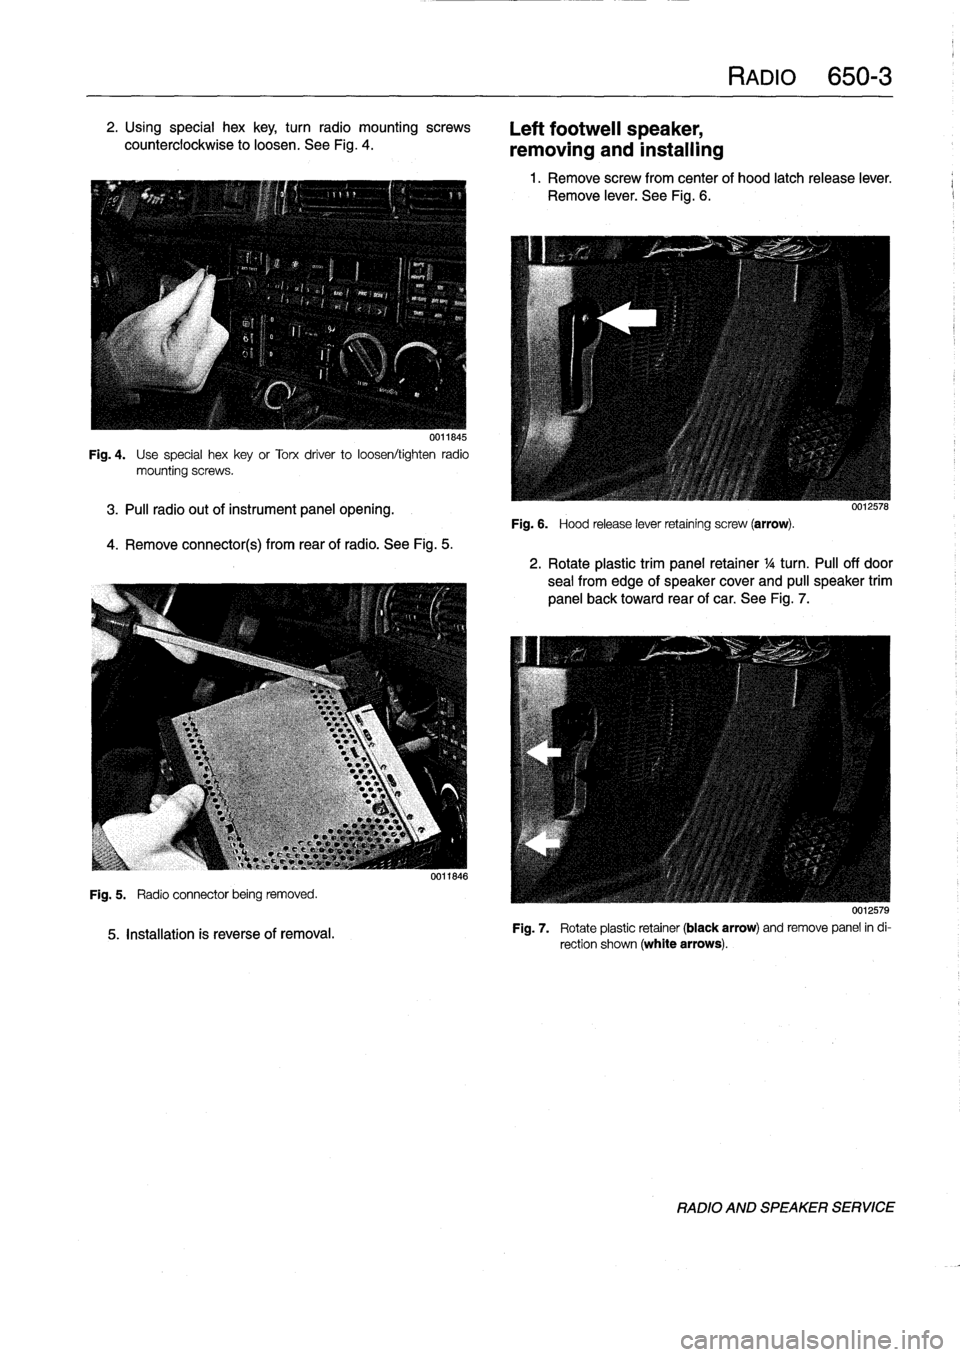 BMW M3 1996 E36 User Guide 2
.
Using
special
hex
key,
turn
radio
mountingscrews

counterclockwise
to
loosen
.
See
Fig
.
4
.

0011845

Fig
.
4
.

	

Use
special
hexkey
or
Torx
driver
to
loosen/tighten
radio
mountingscrews
.

3
.